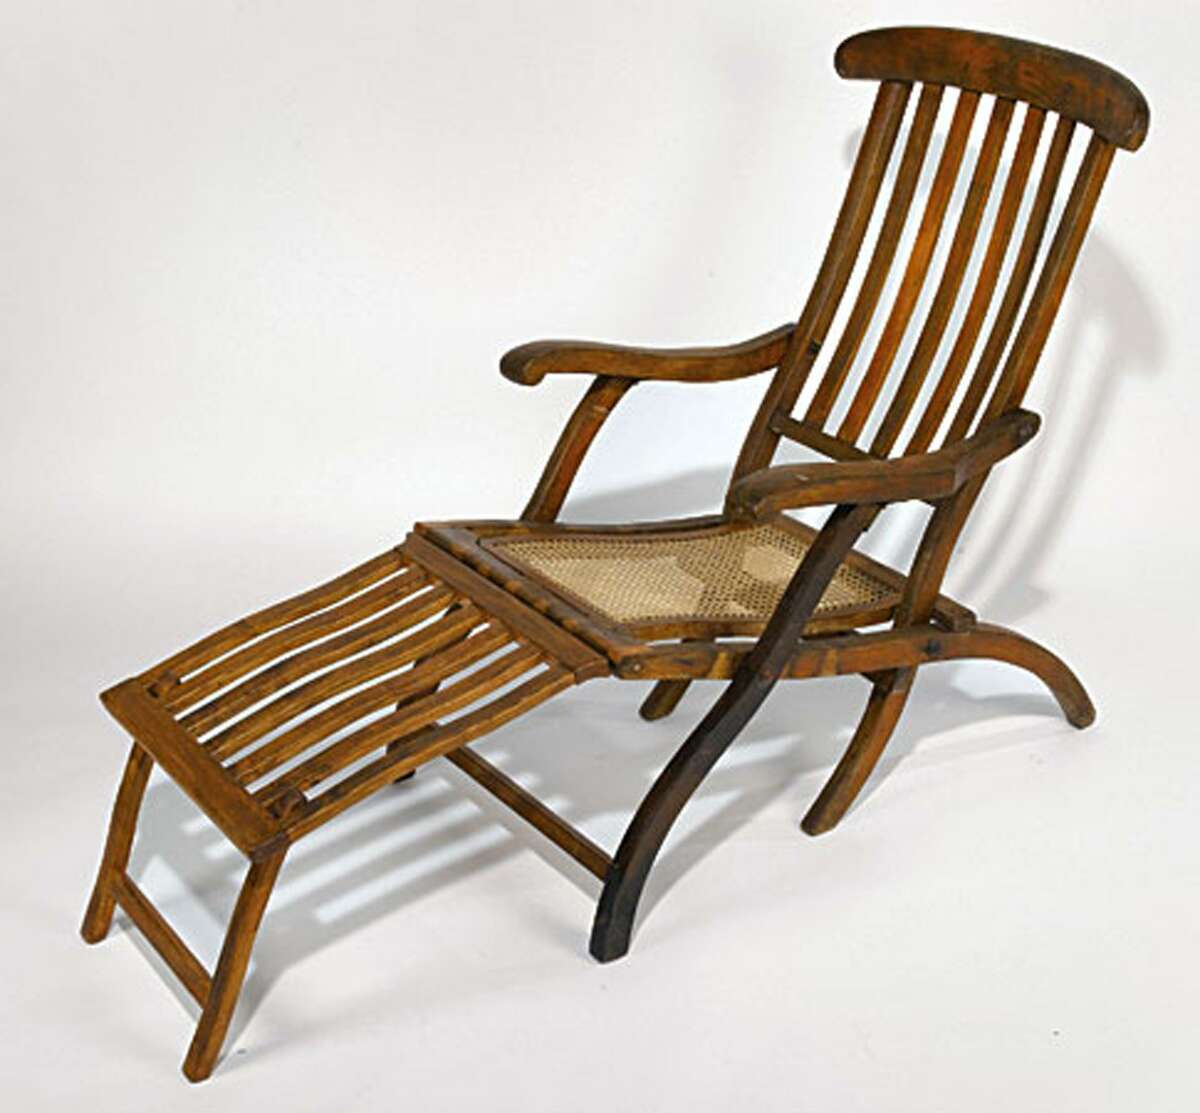 This teak folding deck chair was salvaged by one of the ships that recovered bodies near the site of the 1912 sinking of the luxury liner RMS Titanic.